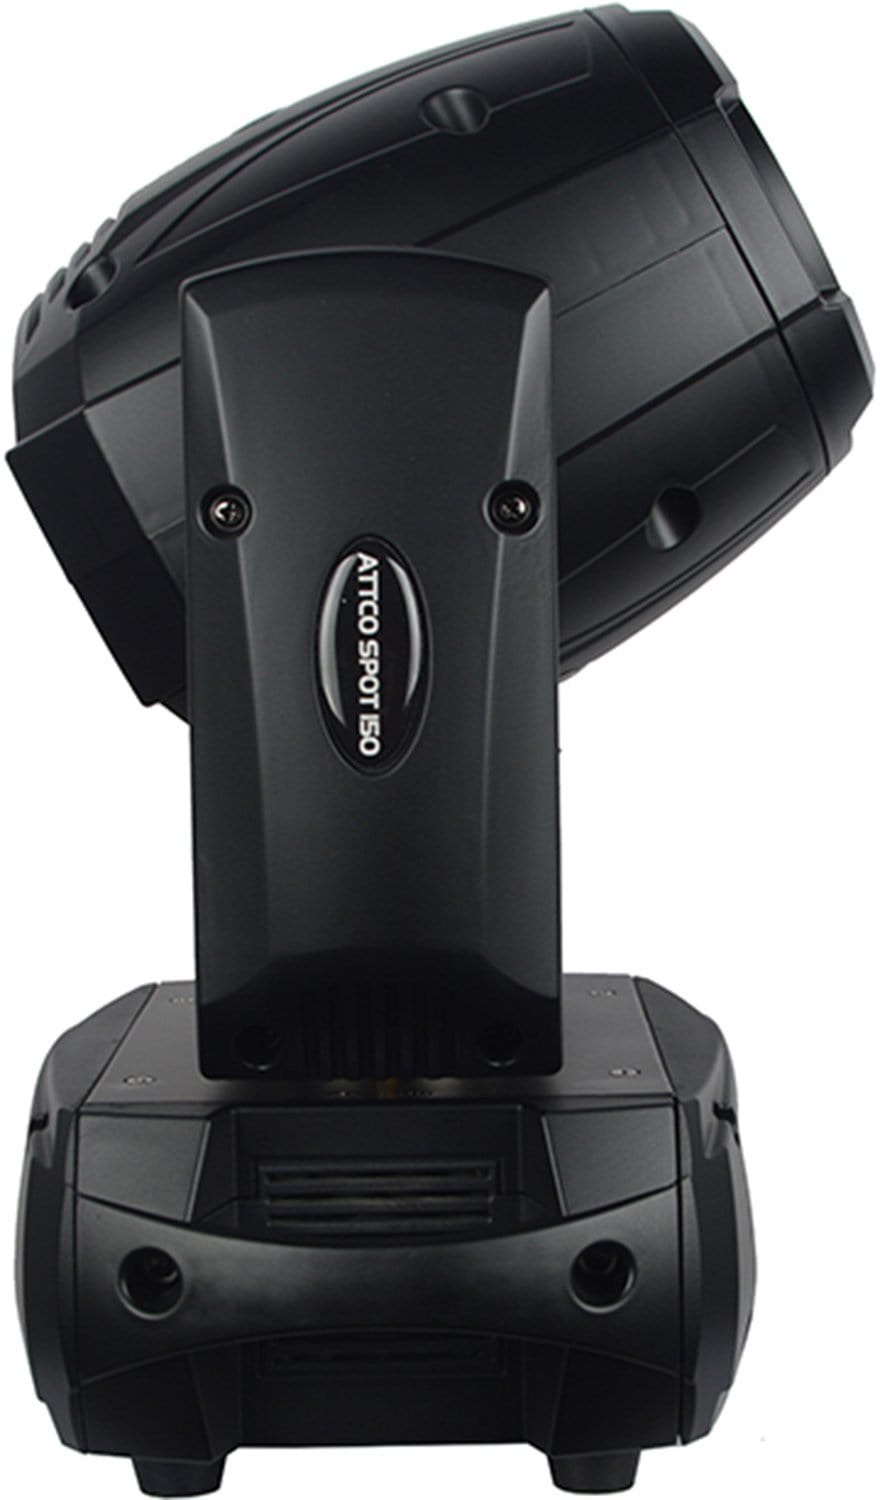 JMAZ Attco Spot 150 LED Moving Head 150W - ProSound and Stage Lighting